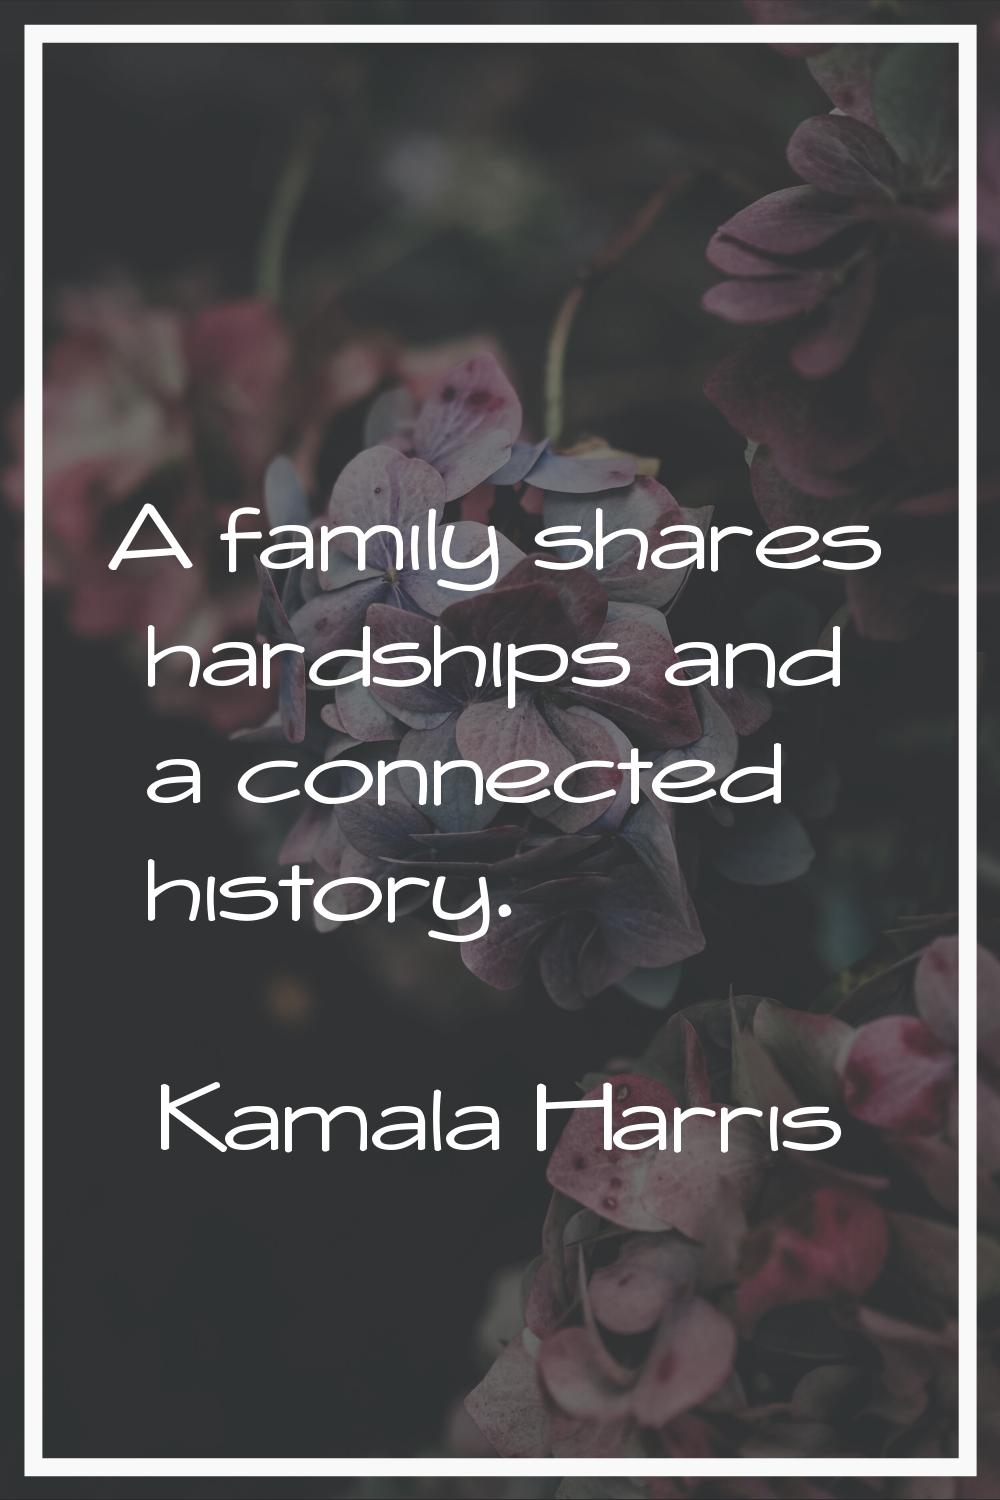 A family shares hardships and a connected history.